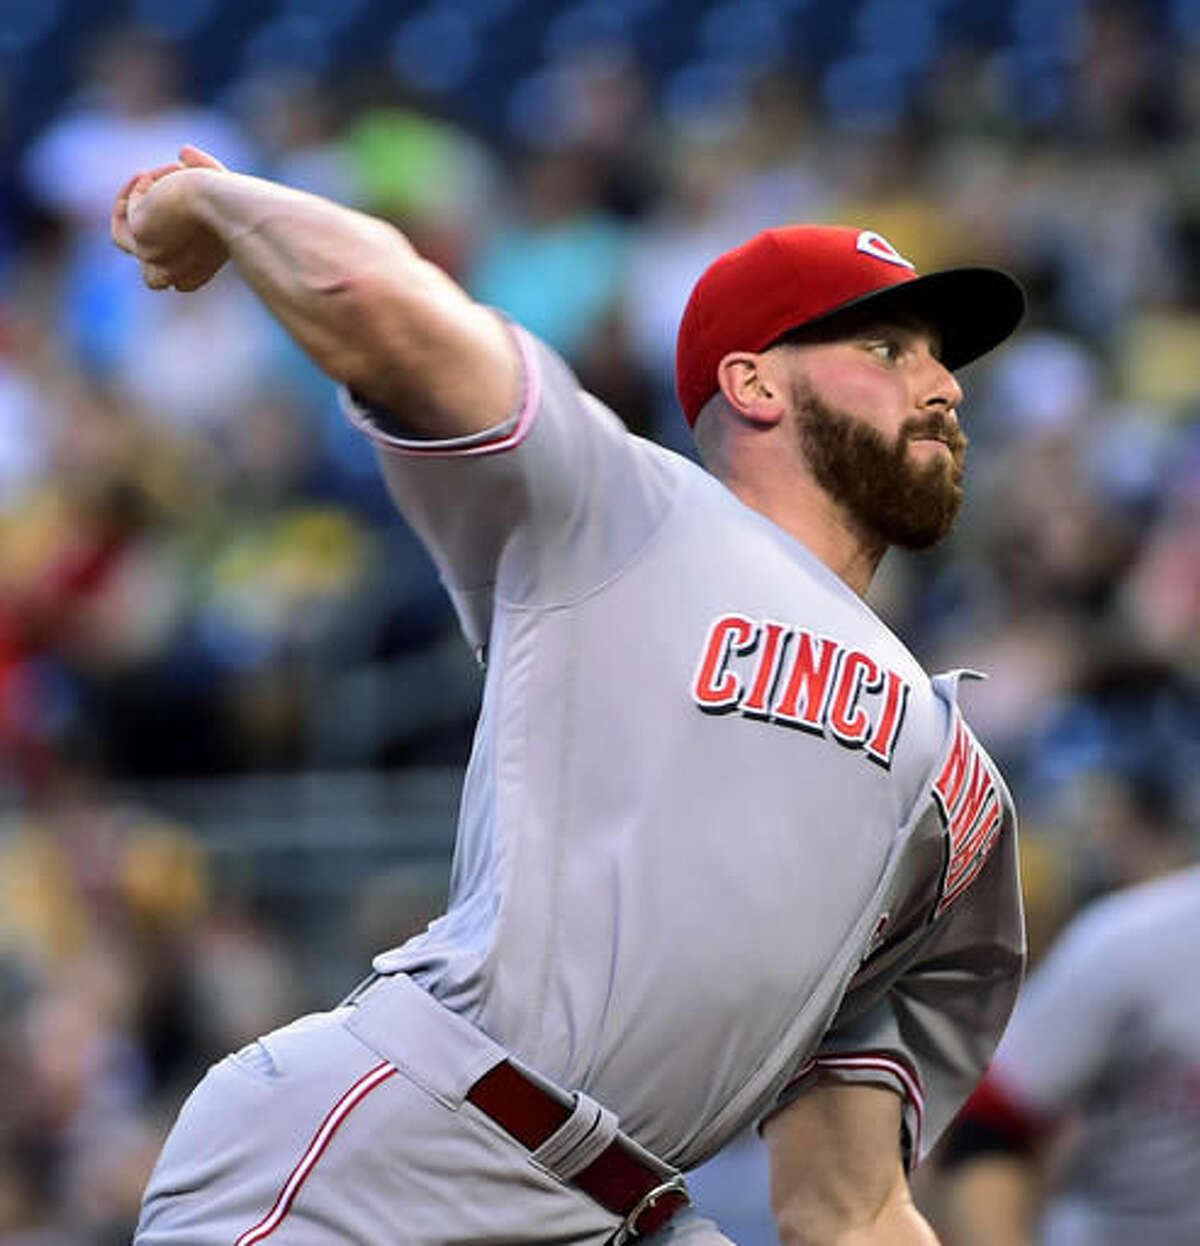 Cincinnati Reds starting pitcher Anthony DeSclafani throws during the first inning of a baseball game against the Pittsburgh Pirates in Pittsburgh, Friday, Aug. 5, 2016. (AP Photo/Fred Vuich)